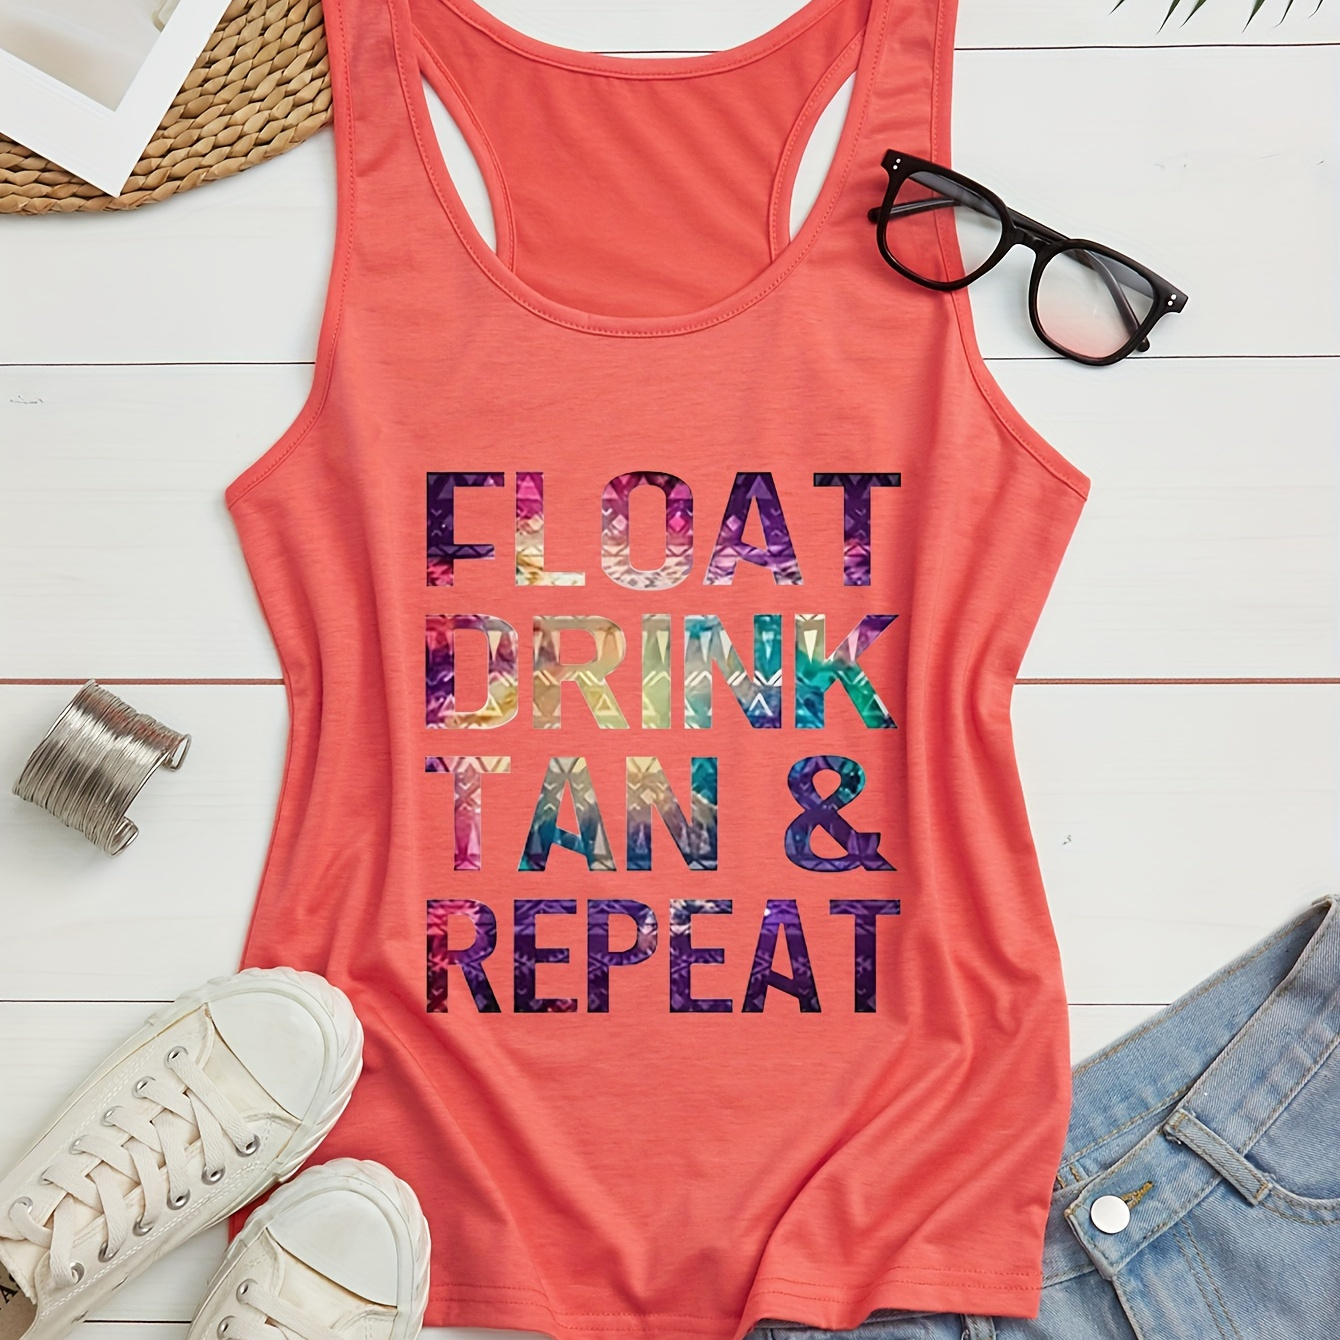 

Women's Sleeveless Tank Top, "float Drink Tan & Repeat" Lettering, Casual Athletic Style, Summer Beachwear, Breathable